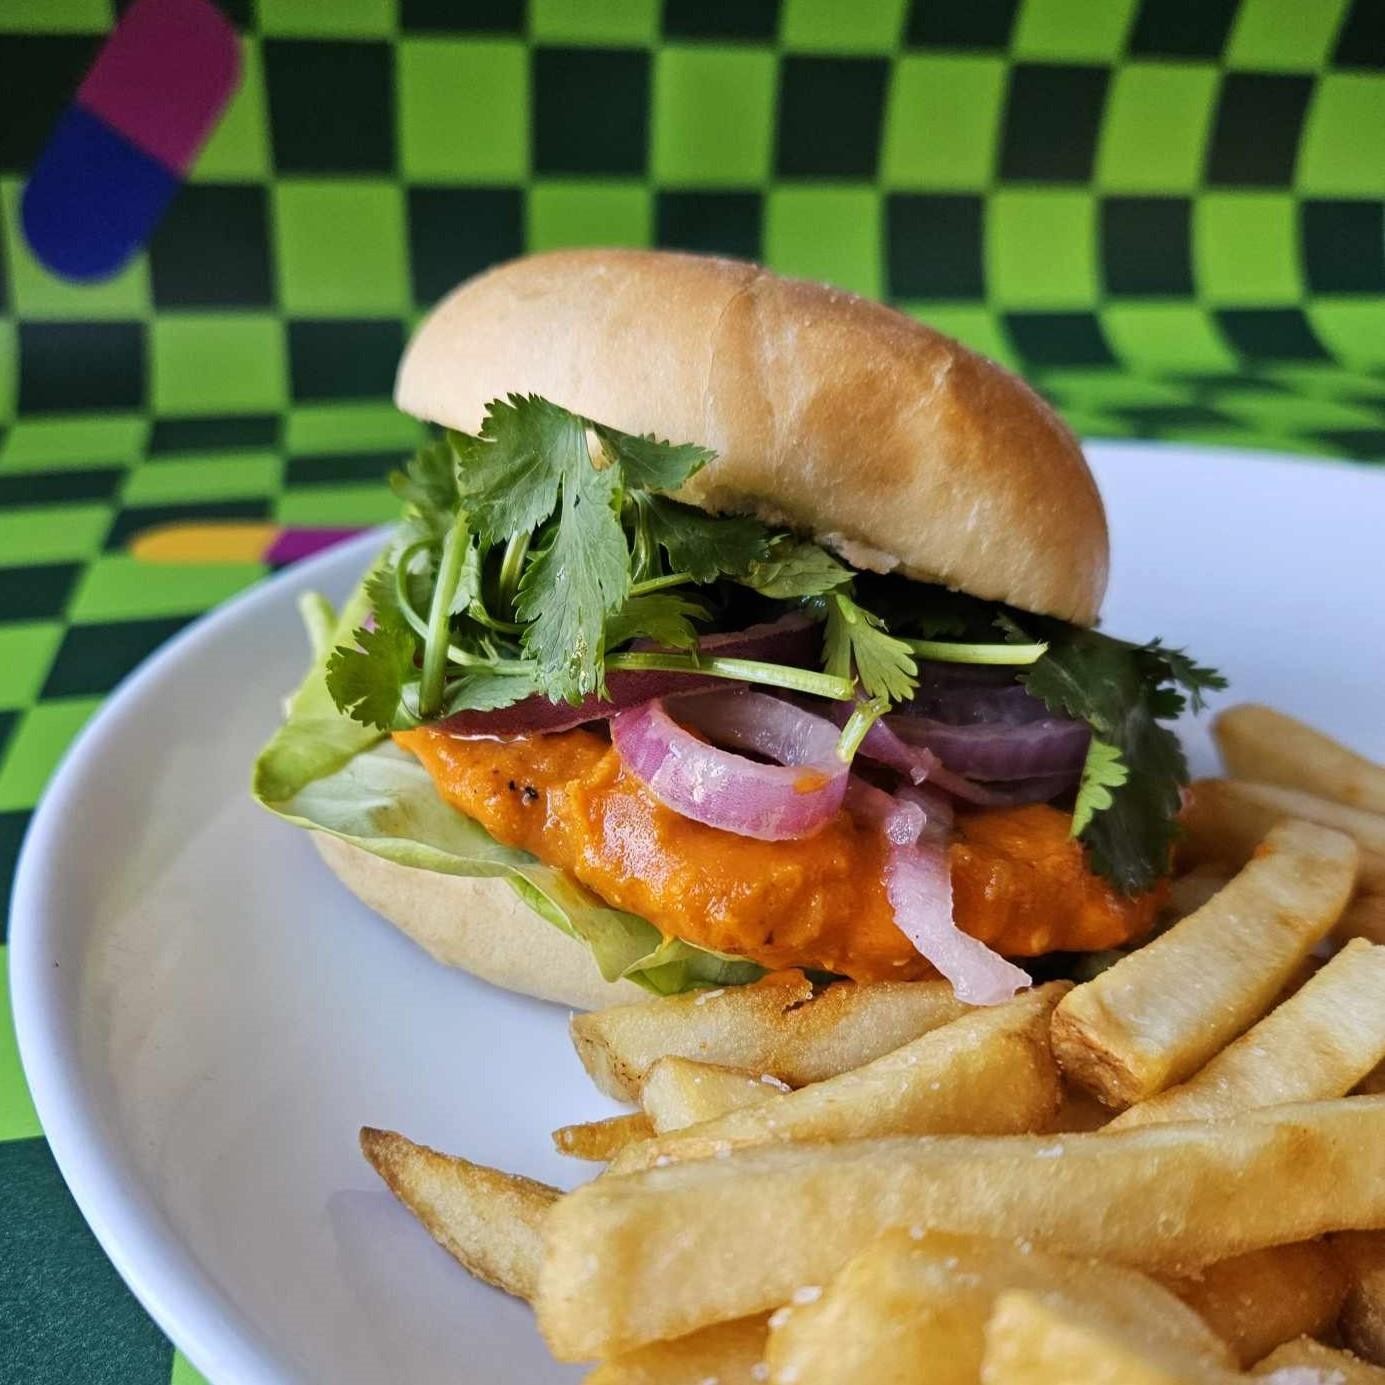 Vegan Chick'n Sandwich - Traditional Roll, Breaded & Fried Vegan Chick'n Patty, Tossed in Garlic Habanero Sauce, Marinated Red Onion, Cilantro, Lettuce